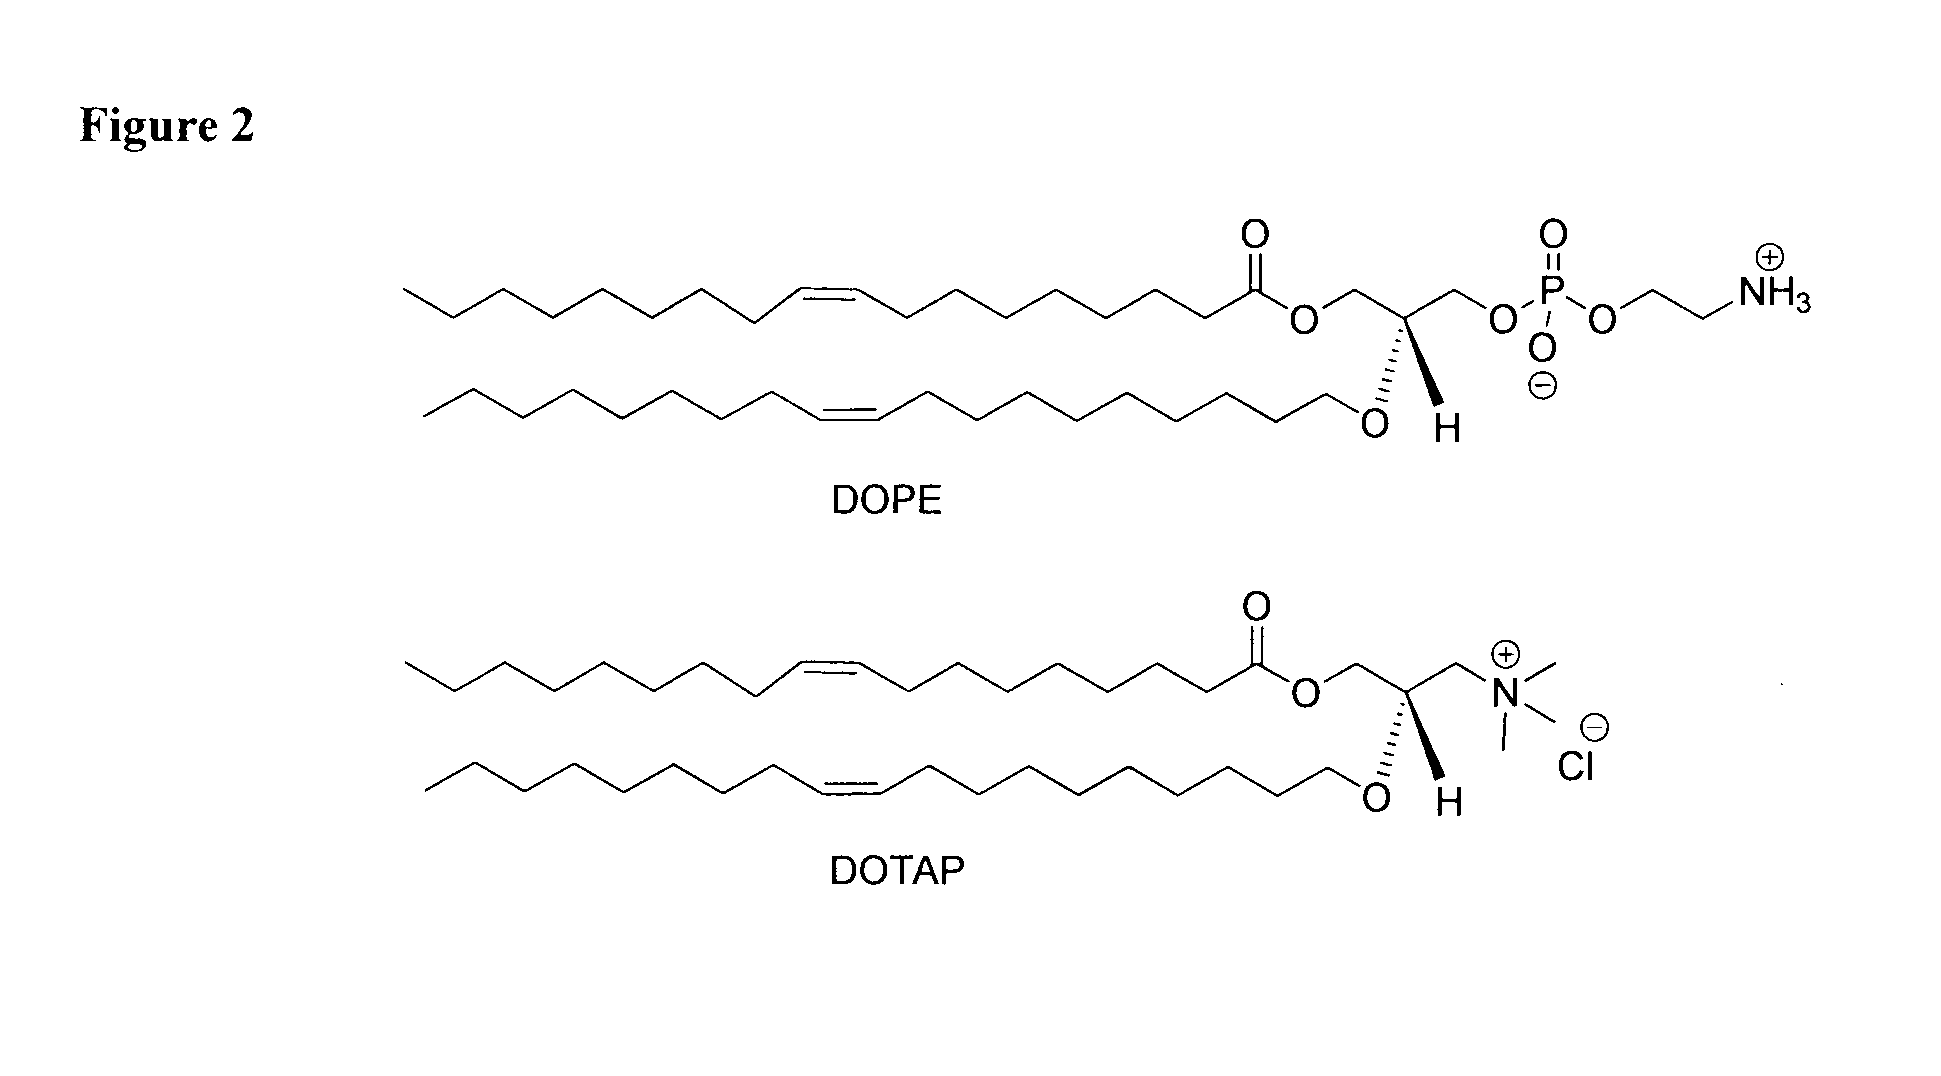 Amphiphilic macromolecules for nucleic acid delivery